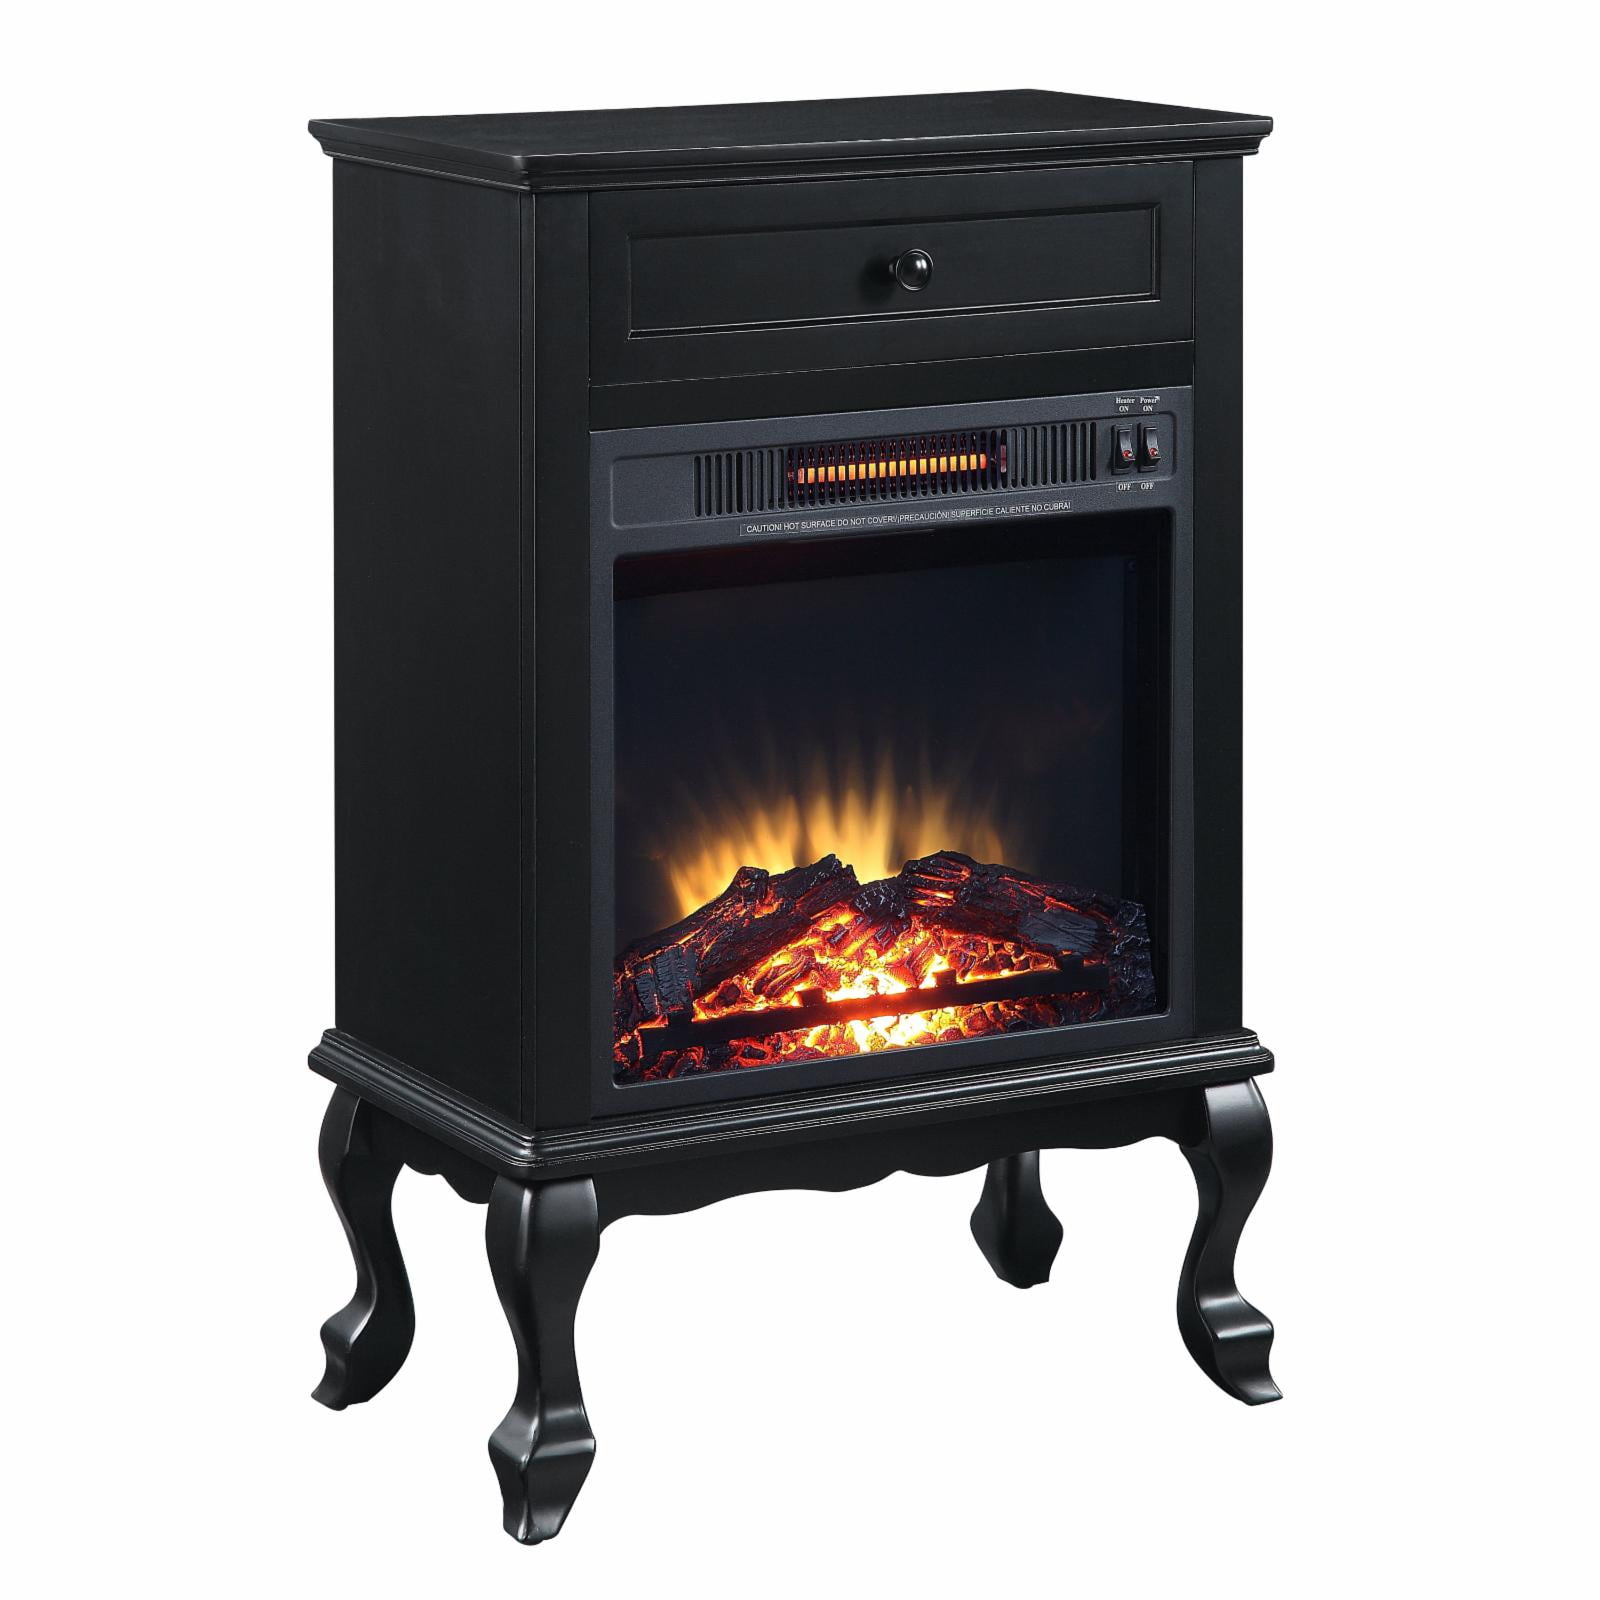 Picture of Acme Furniture AC00854 23 x 13 x 34 in. Eirene Fireplace, Black